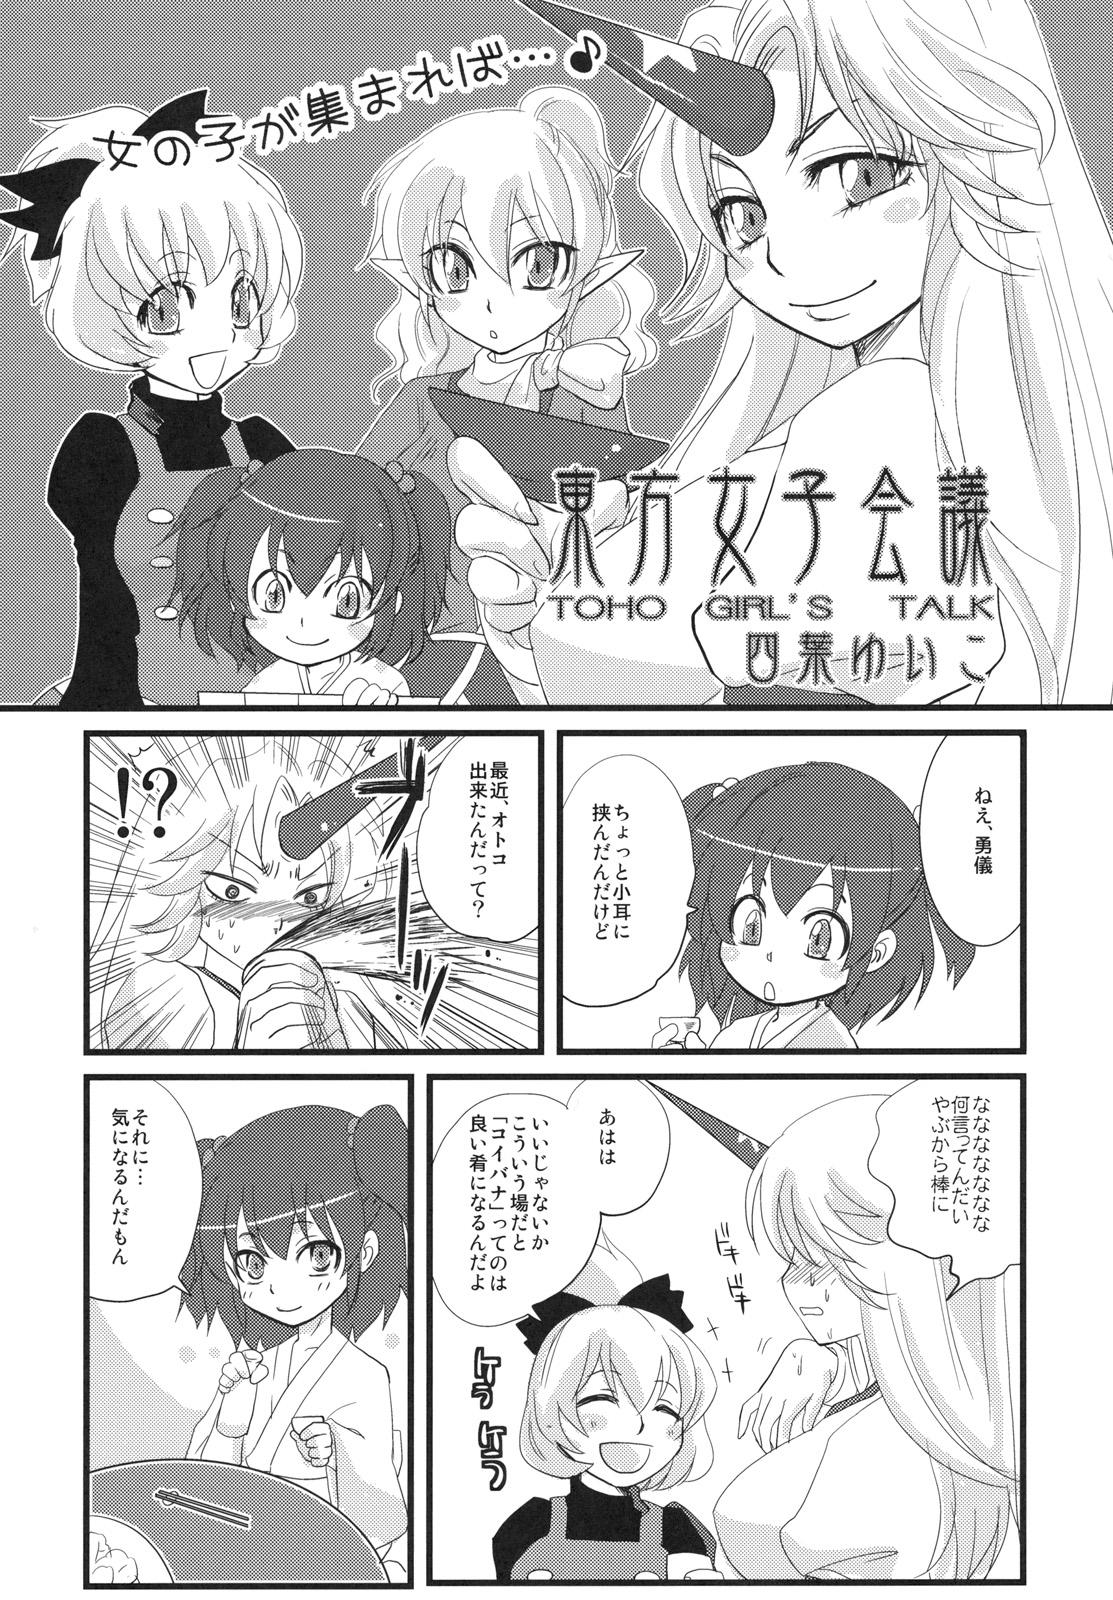 Muscle Touhou Under the Shrine - Touhou project Stunning - Page 5